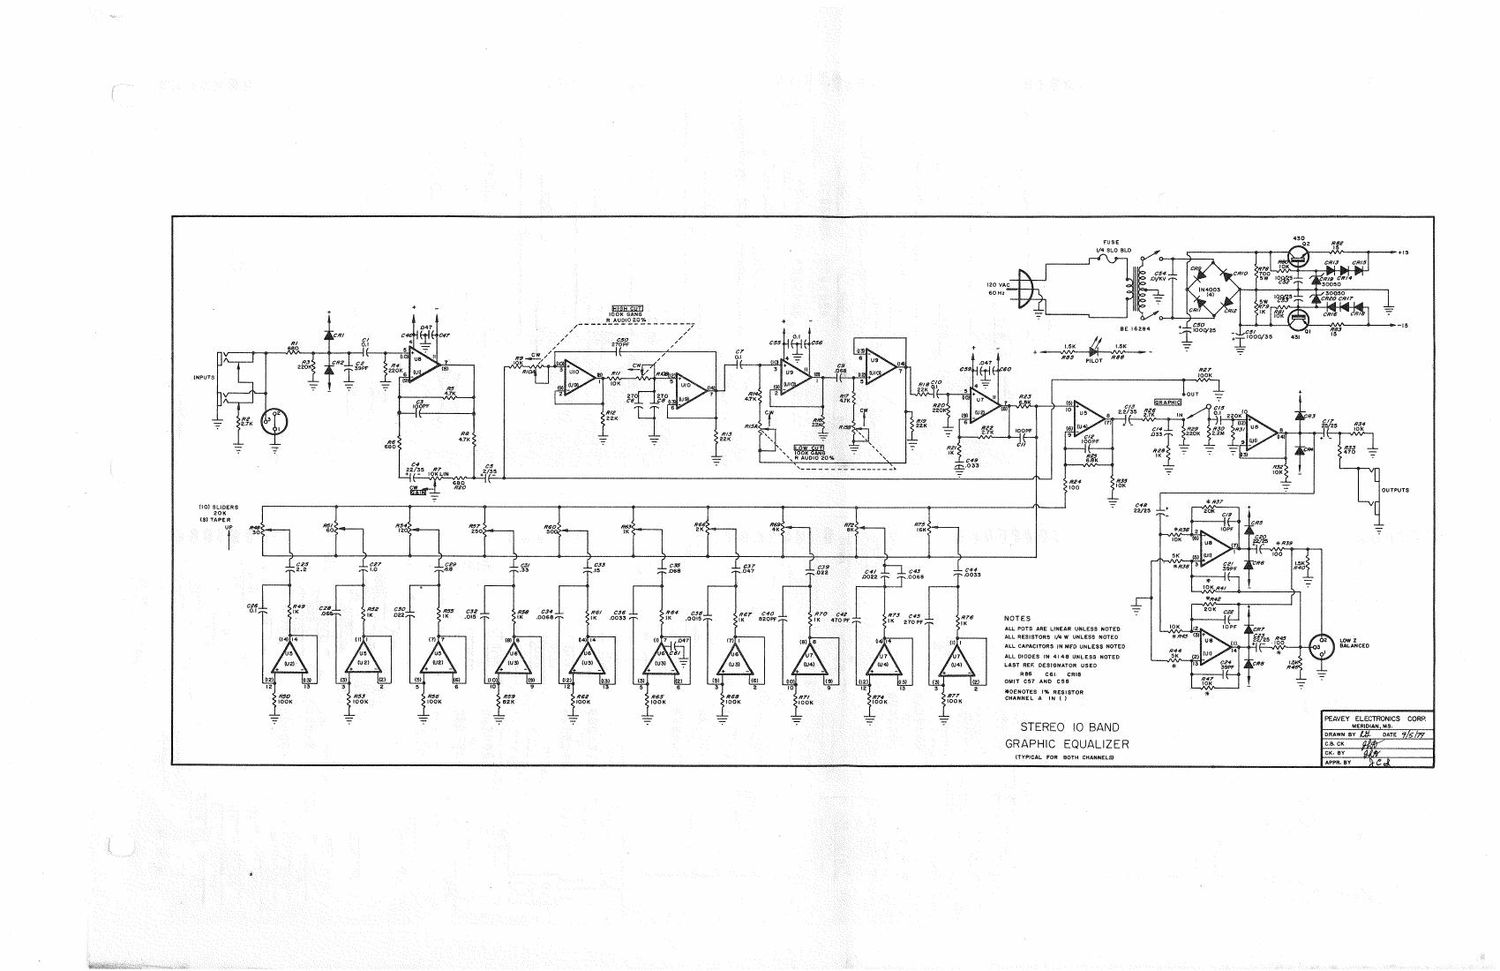 Peavey Stereo 10 Band Graphic EQ Schematic